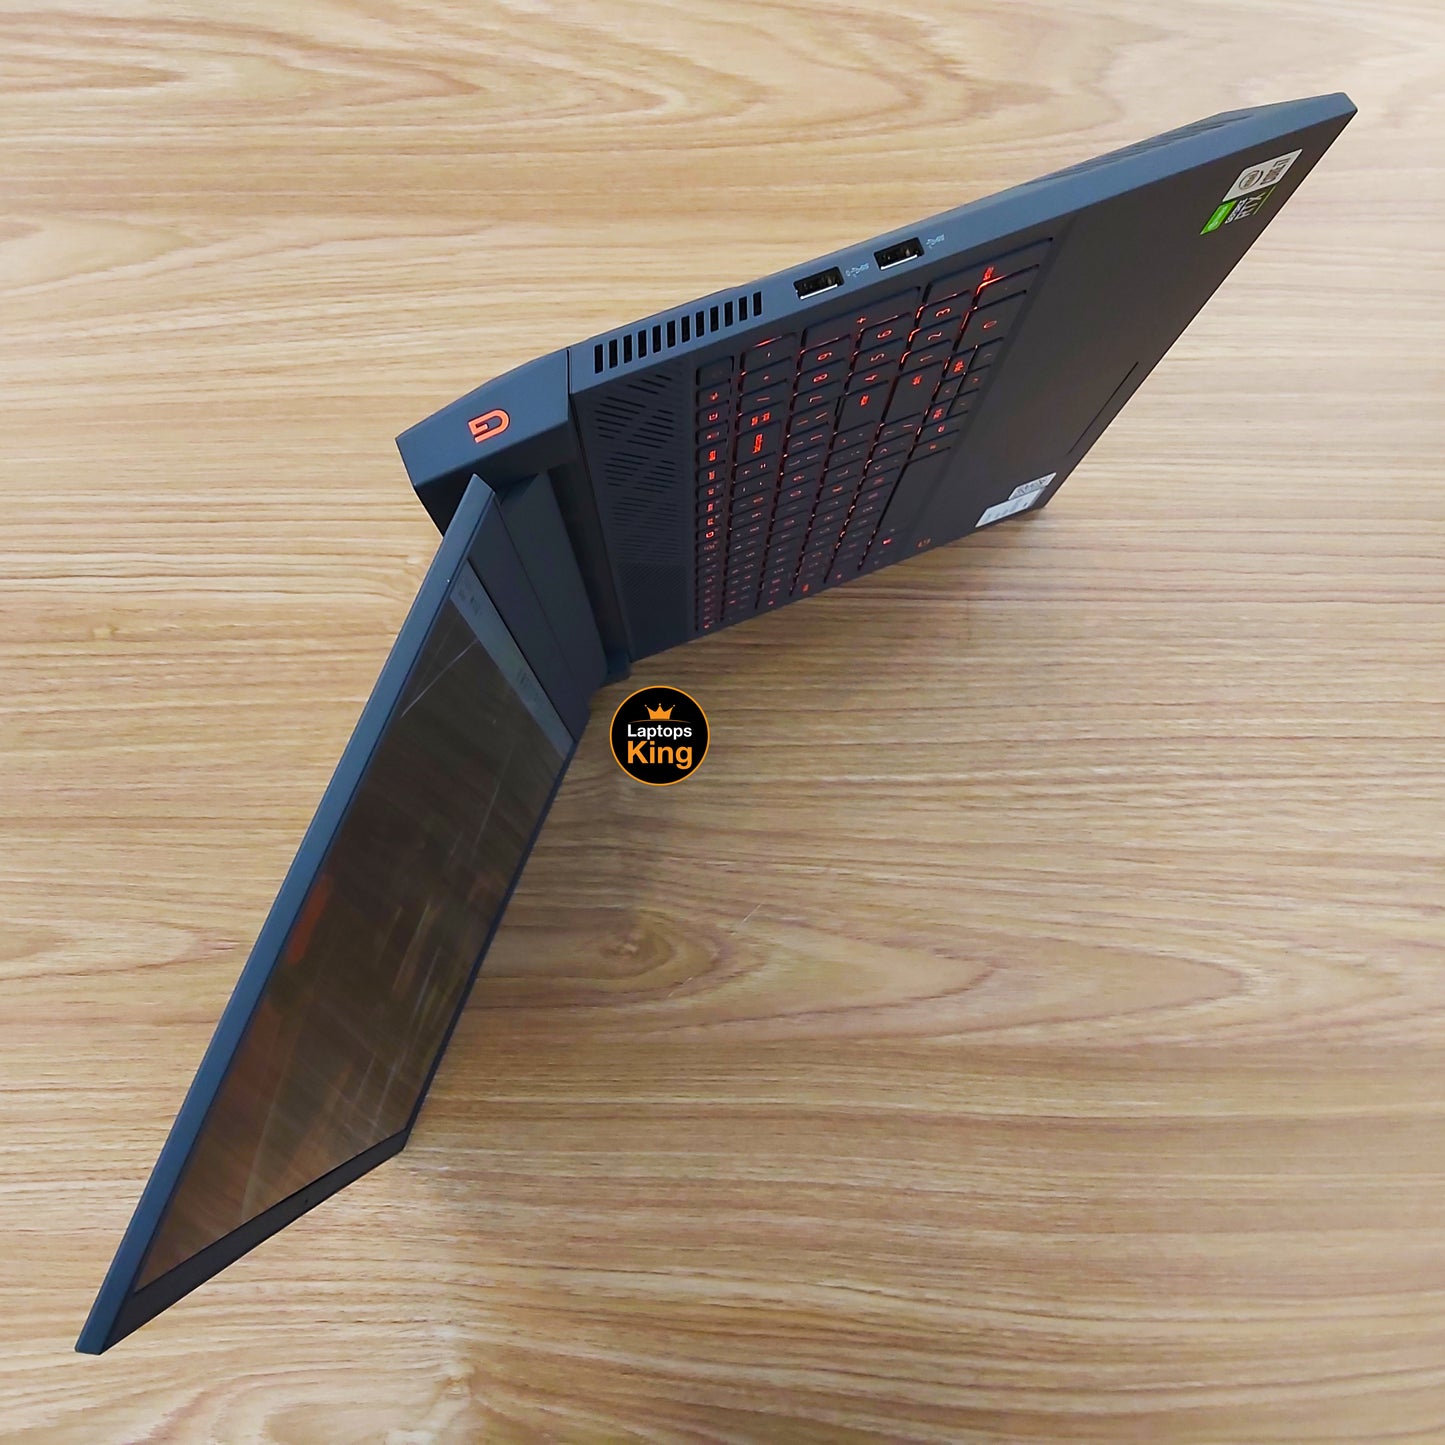 Dell G15 5510 RTX 3060 Gaming Laptop (Brand New)